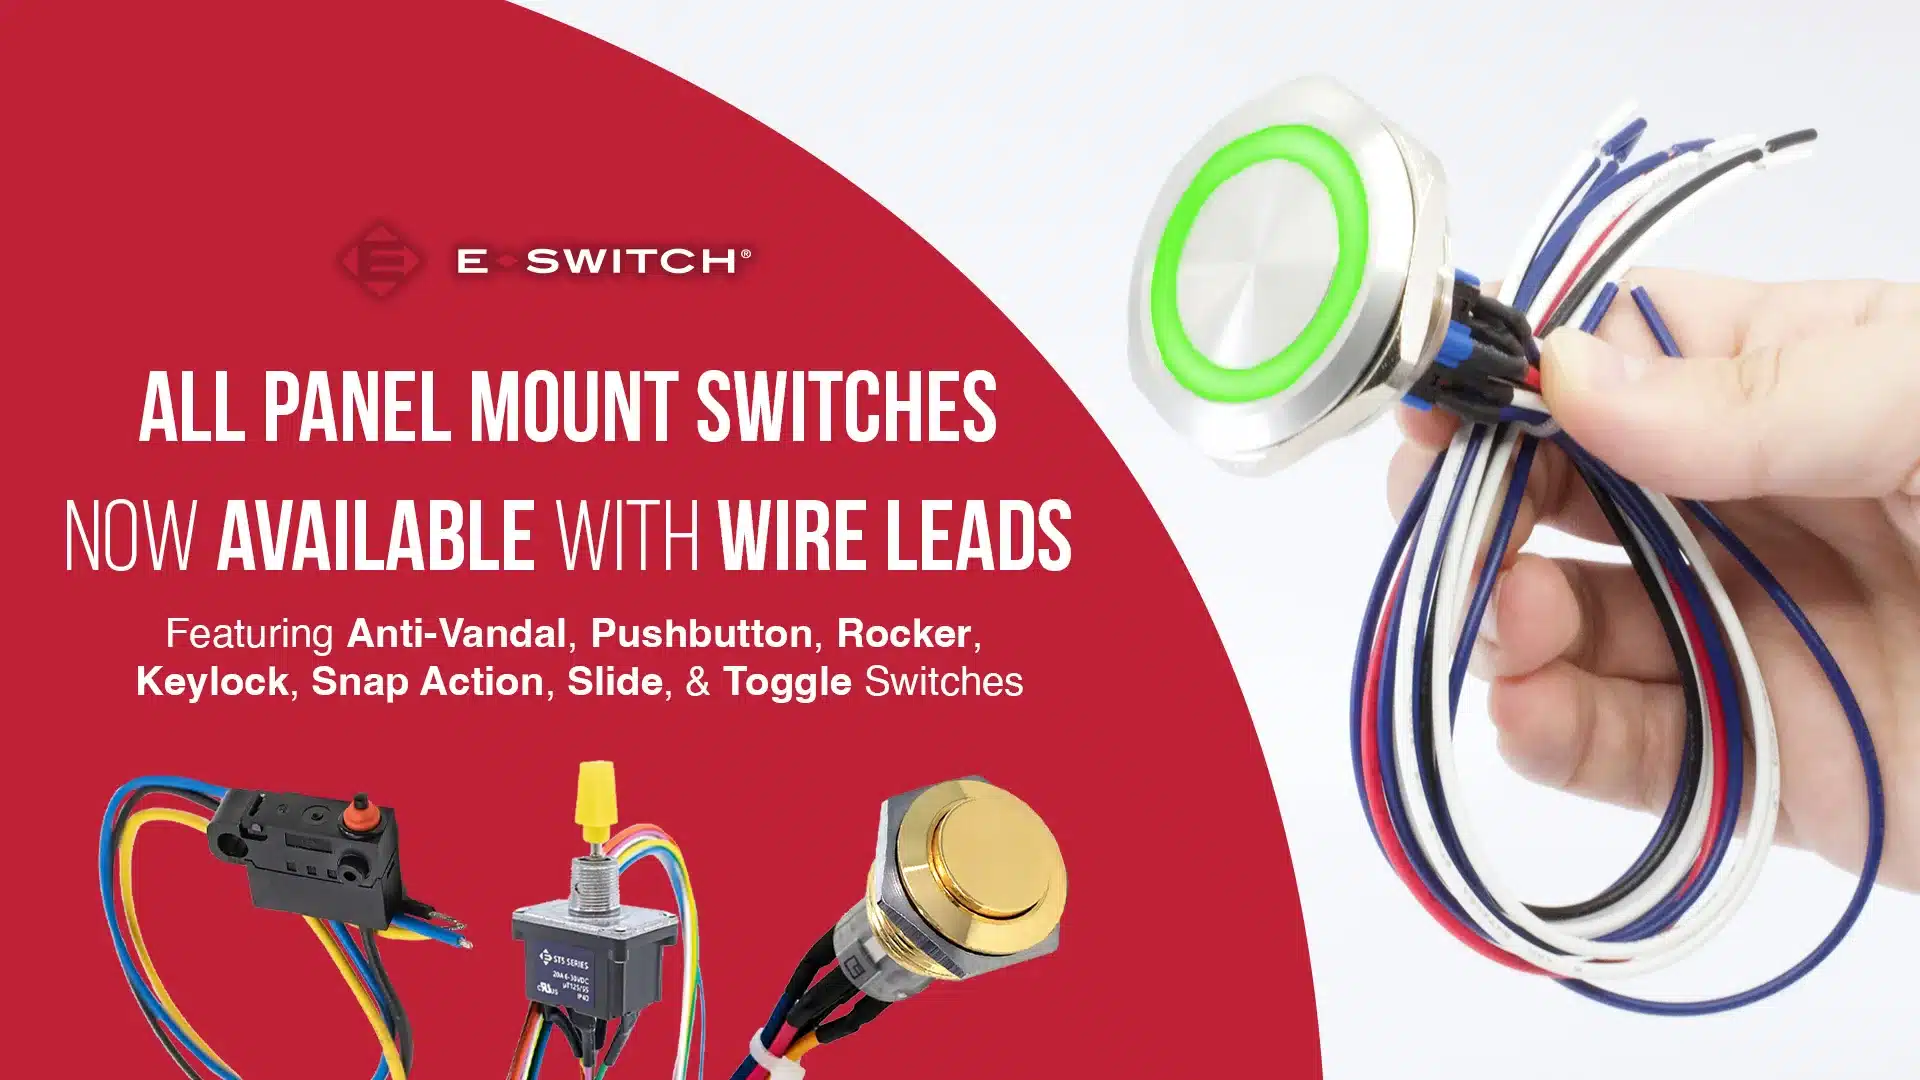 All Panel Mount Switches Now Available with Wire Leads